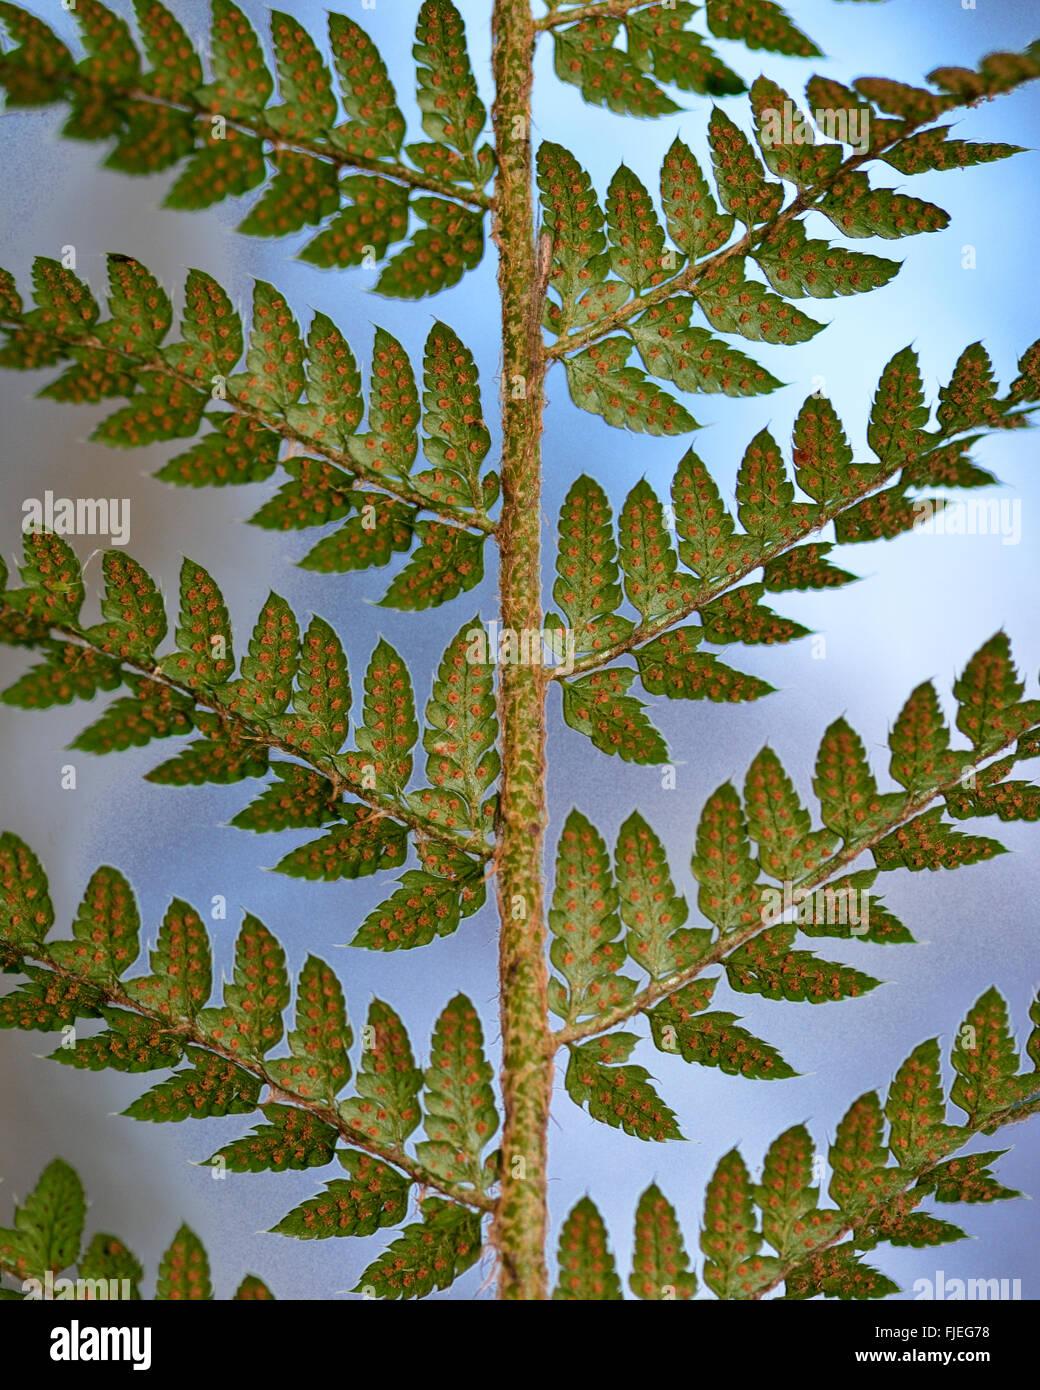 Soft shield fern (Polystichum setiferum) underside of frond. Reproductive sori and sporangia are visible on this fern Stock Photo